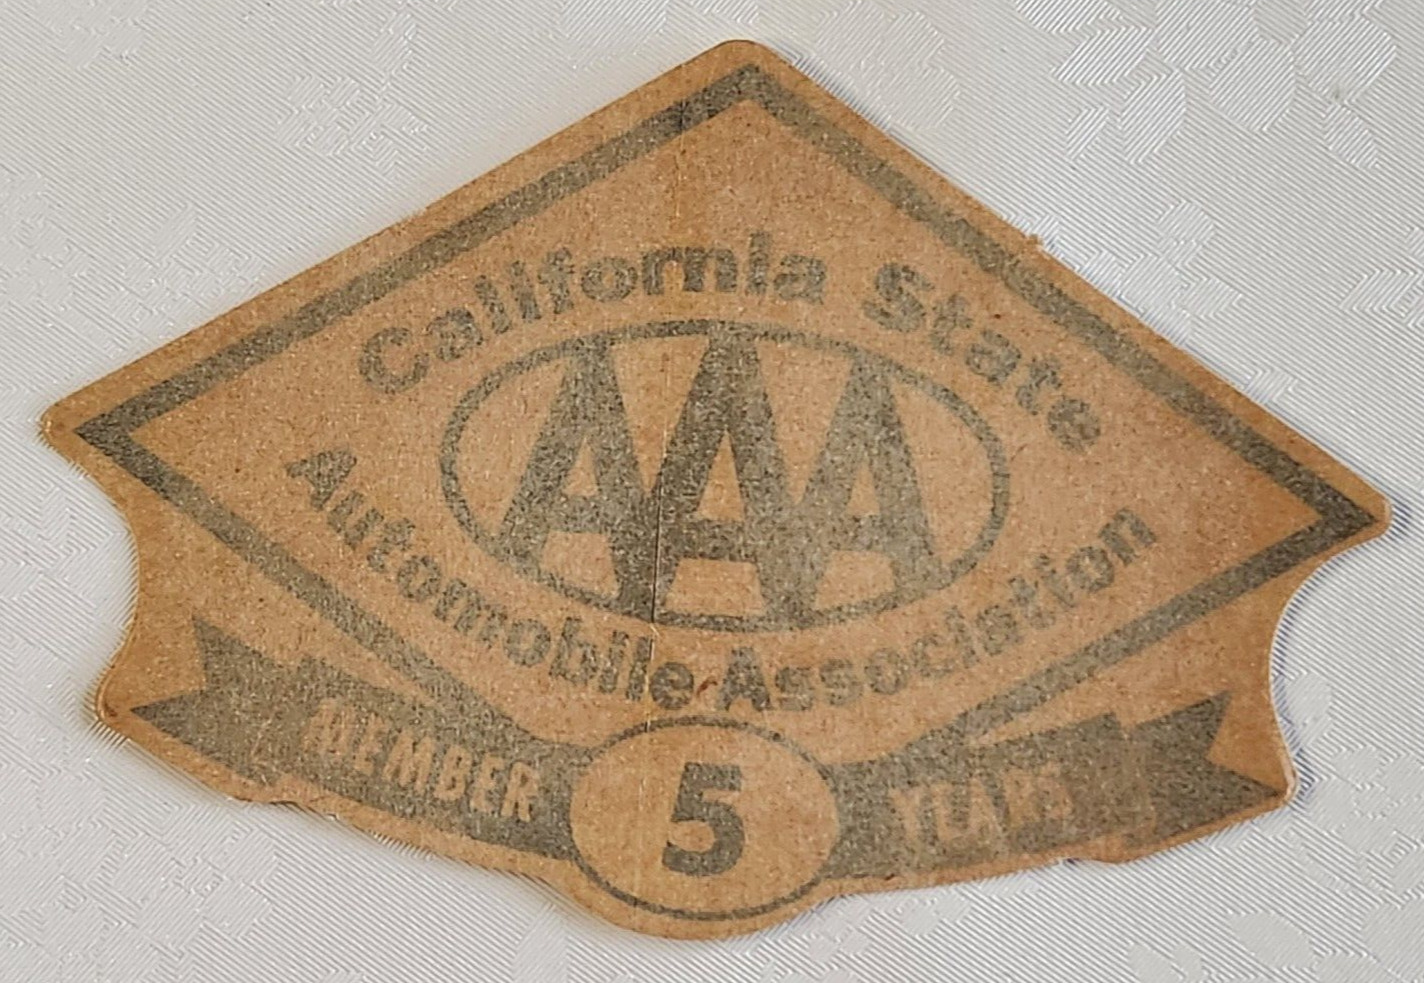 1960s AAA California State Automobile Association 5 Year Member Emblem Decal